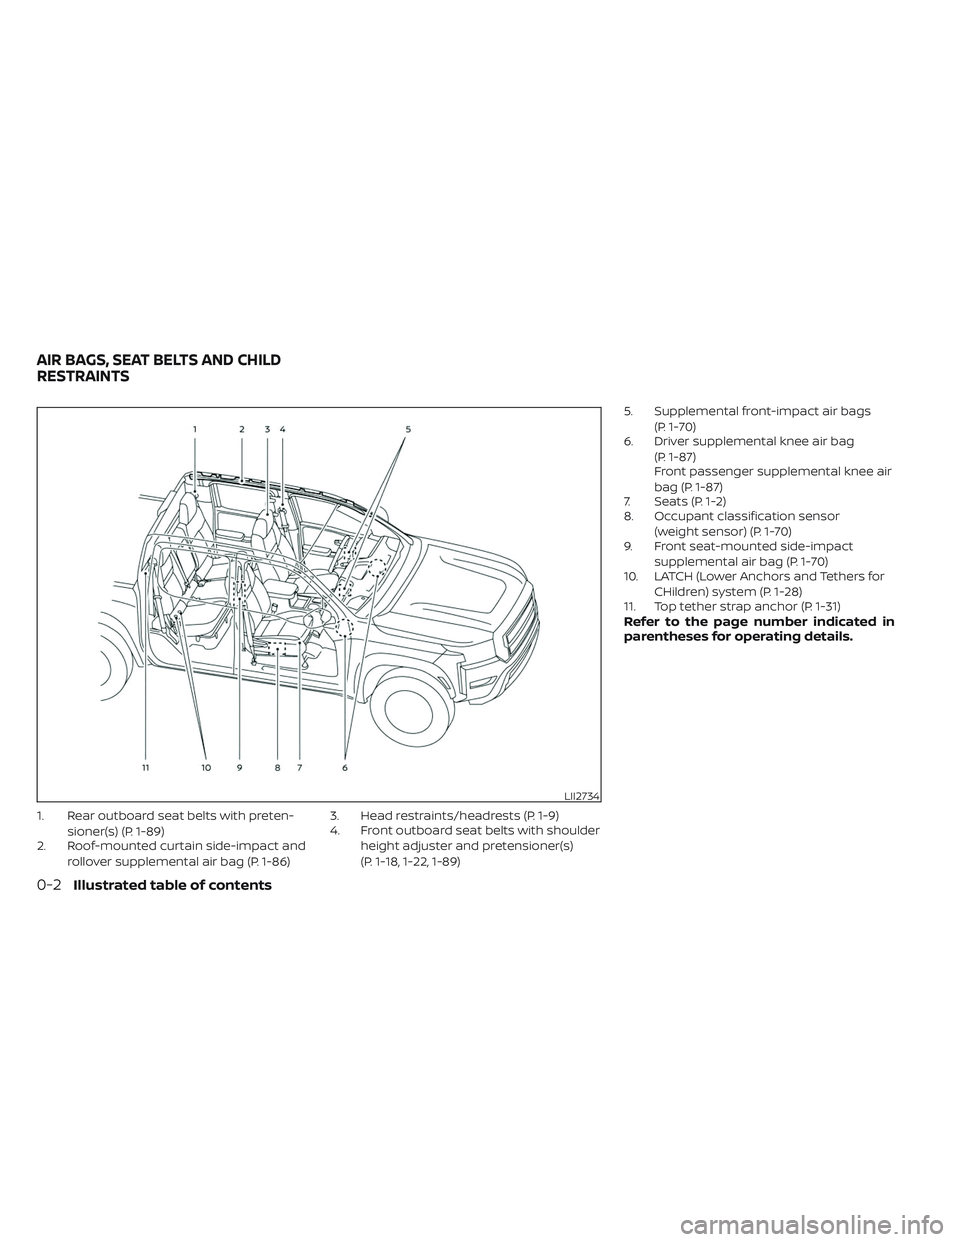 NISSAN FRONTIER 2023  Owners Manual 1. Rear outboard seat belts with preten-sioner(s) (P. 1-89)
2. Roof-mounted curtain side-impact and
rollover supplemental air bag (P. 1-86) 3. Head restraints/headrests (P. 1-9)
4. Front outboard seat